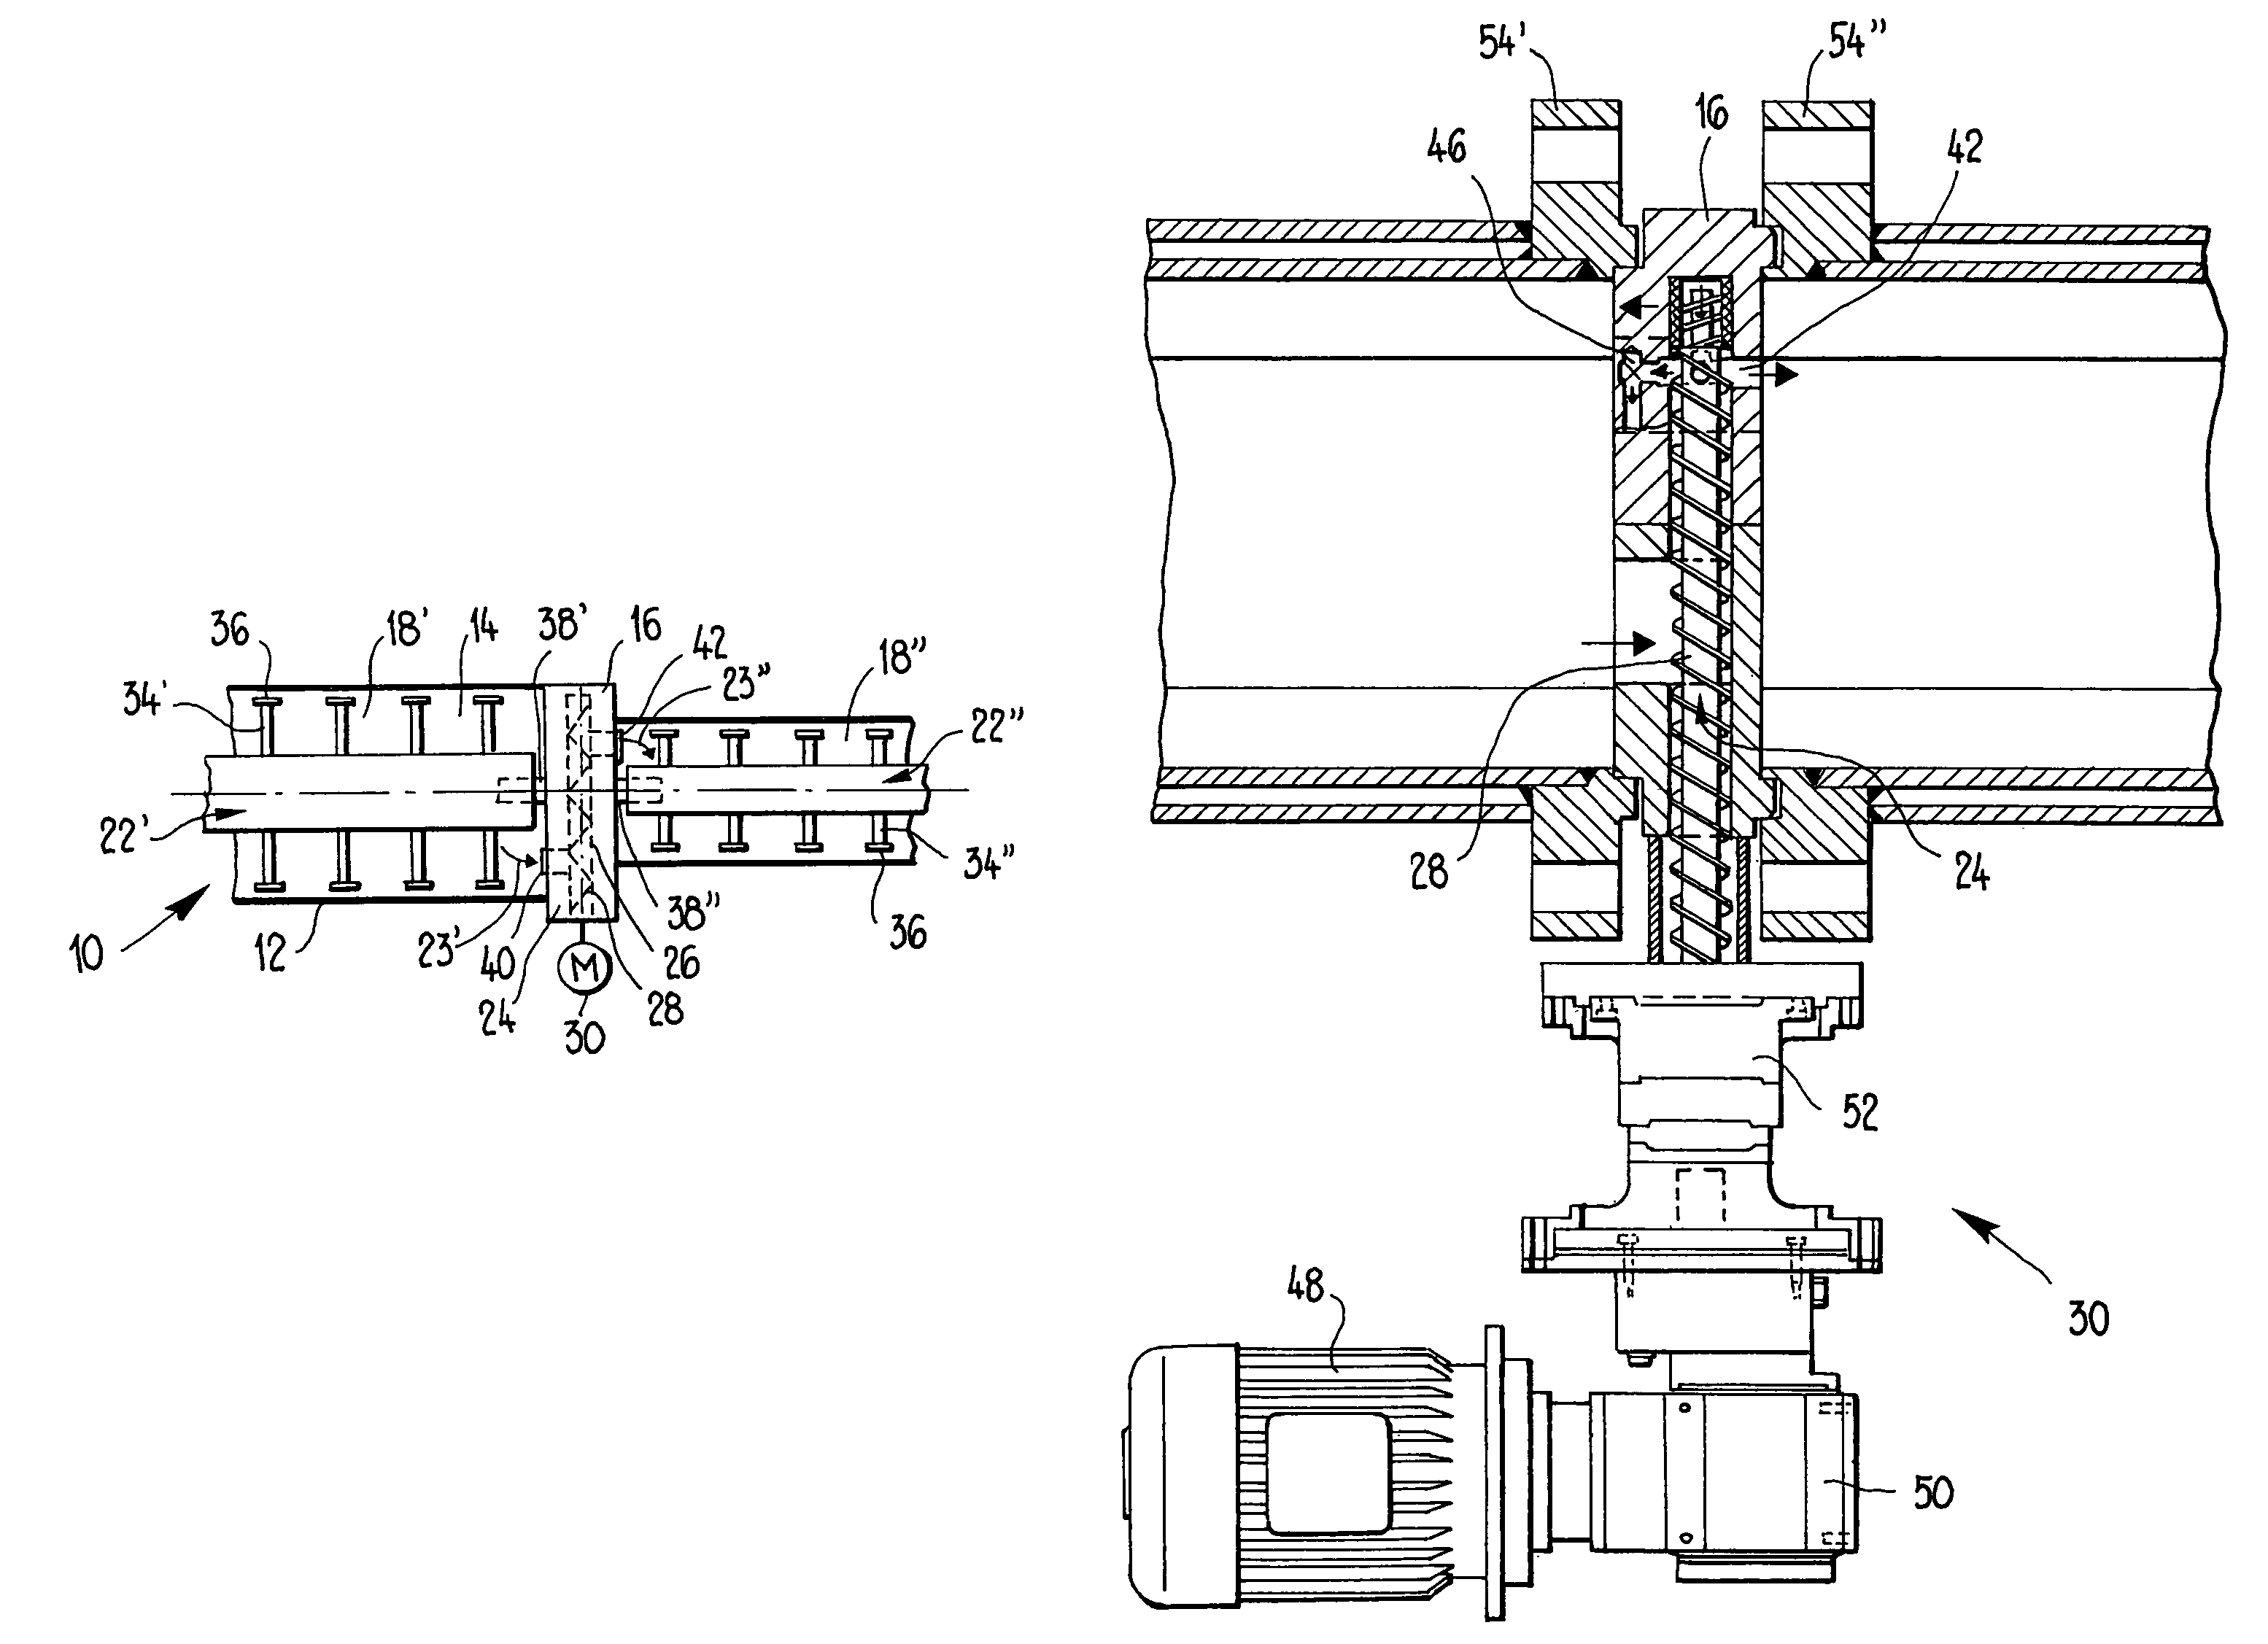 Large-volume reactor having a plurality of process spaces